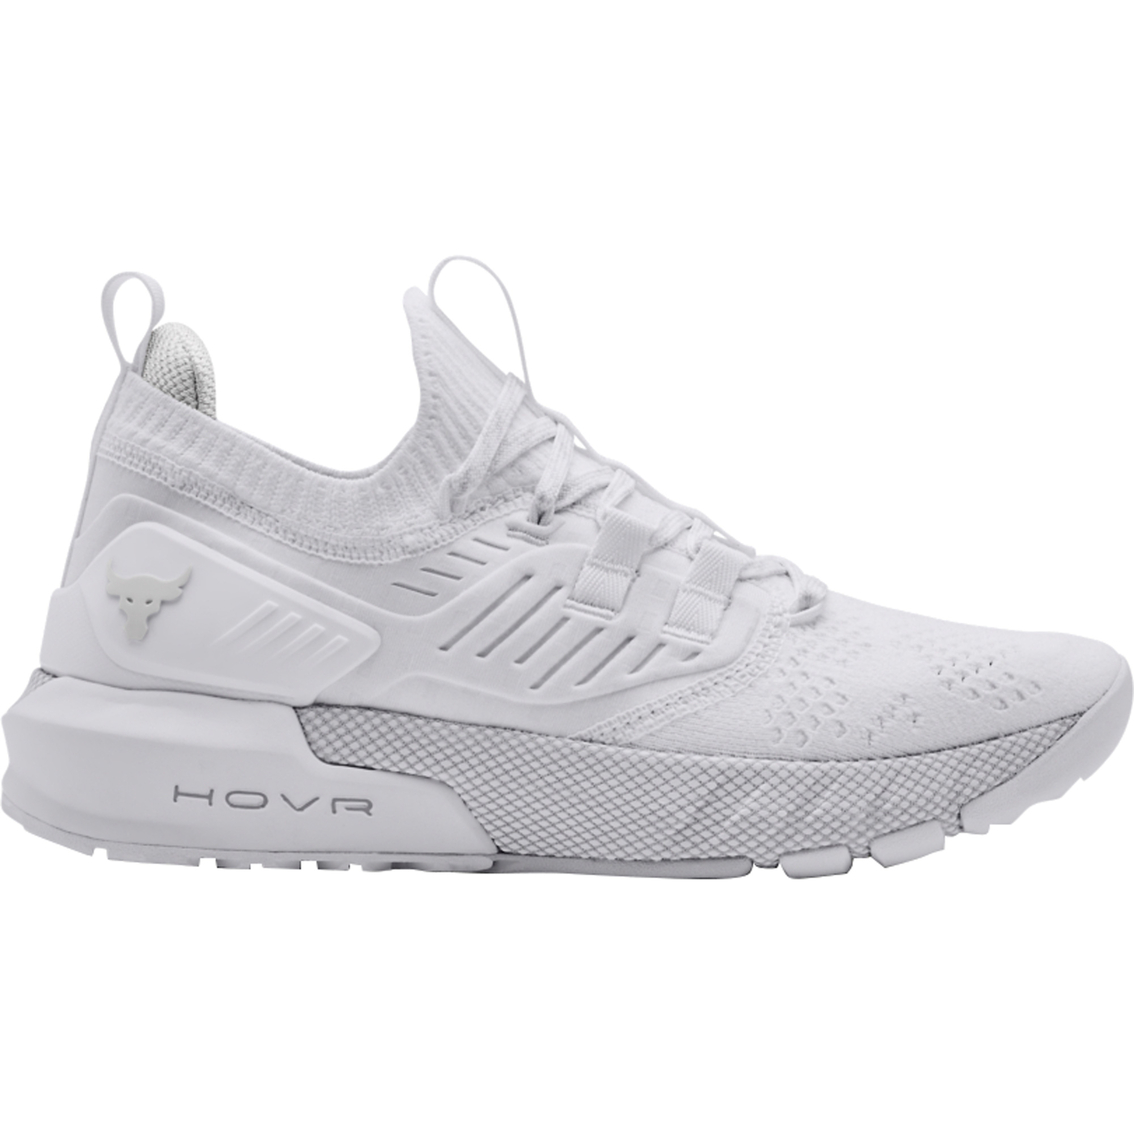 Buy > under armour project rock 3 women's > in stock